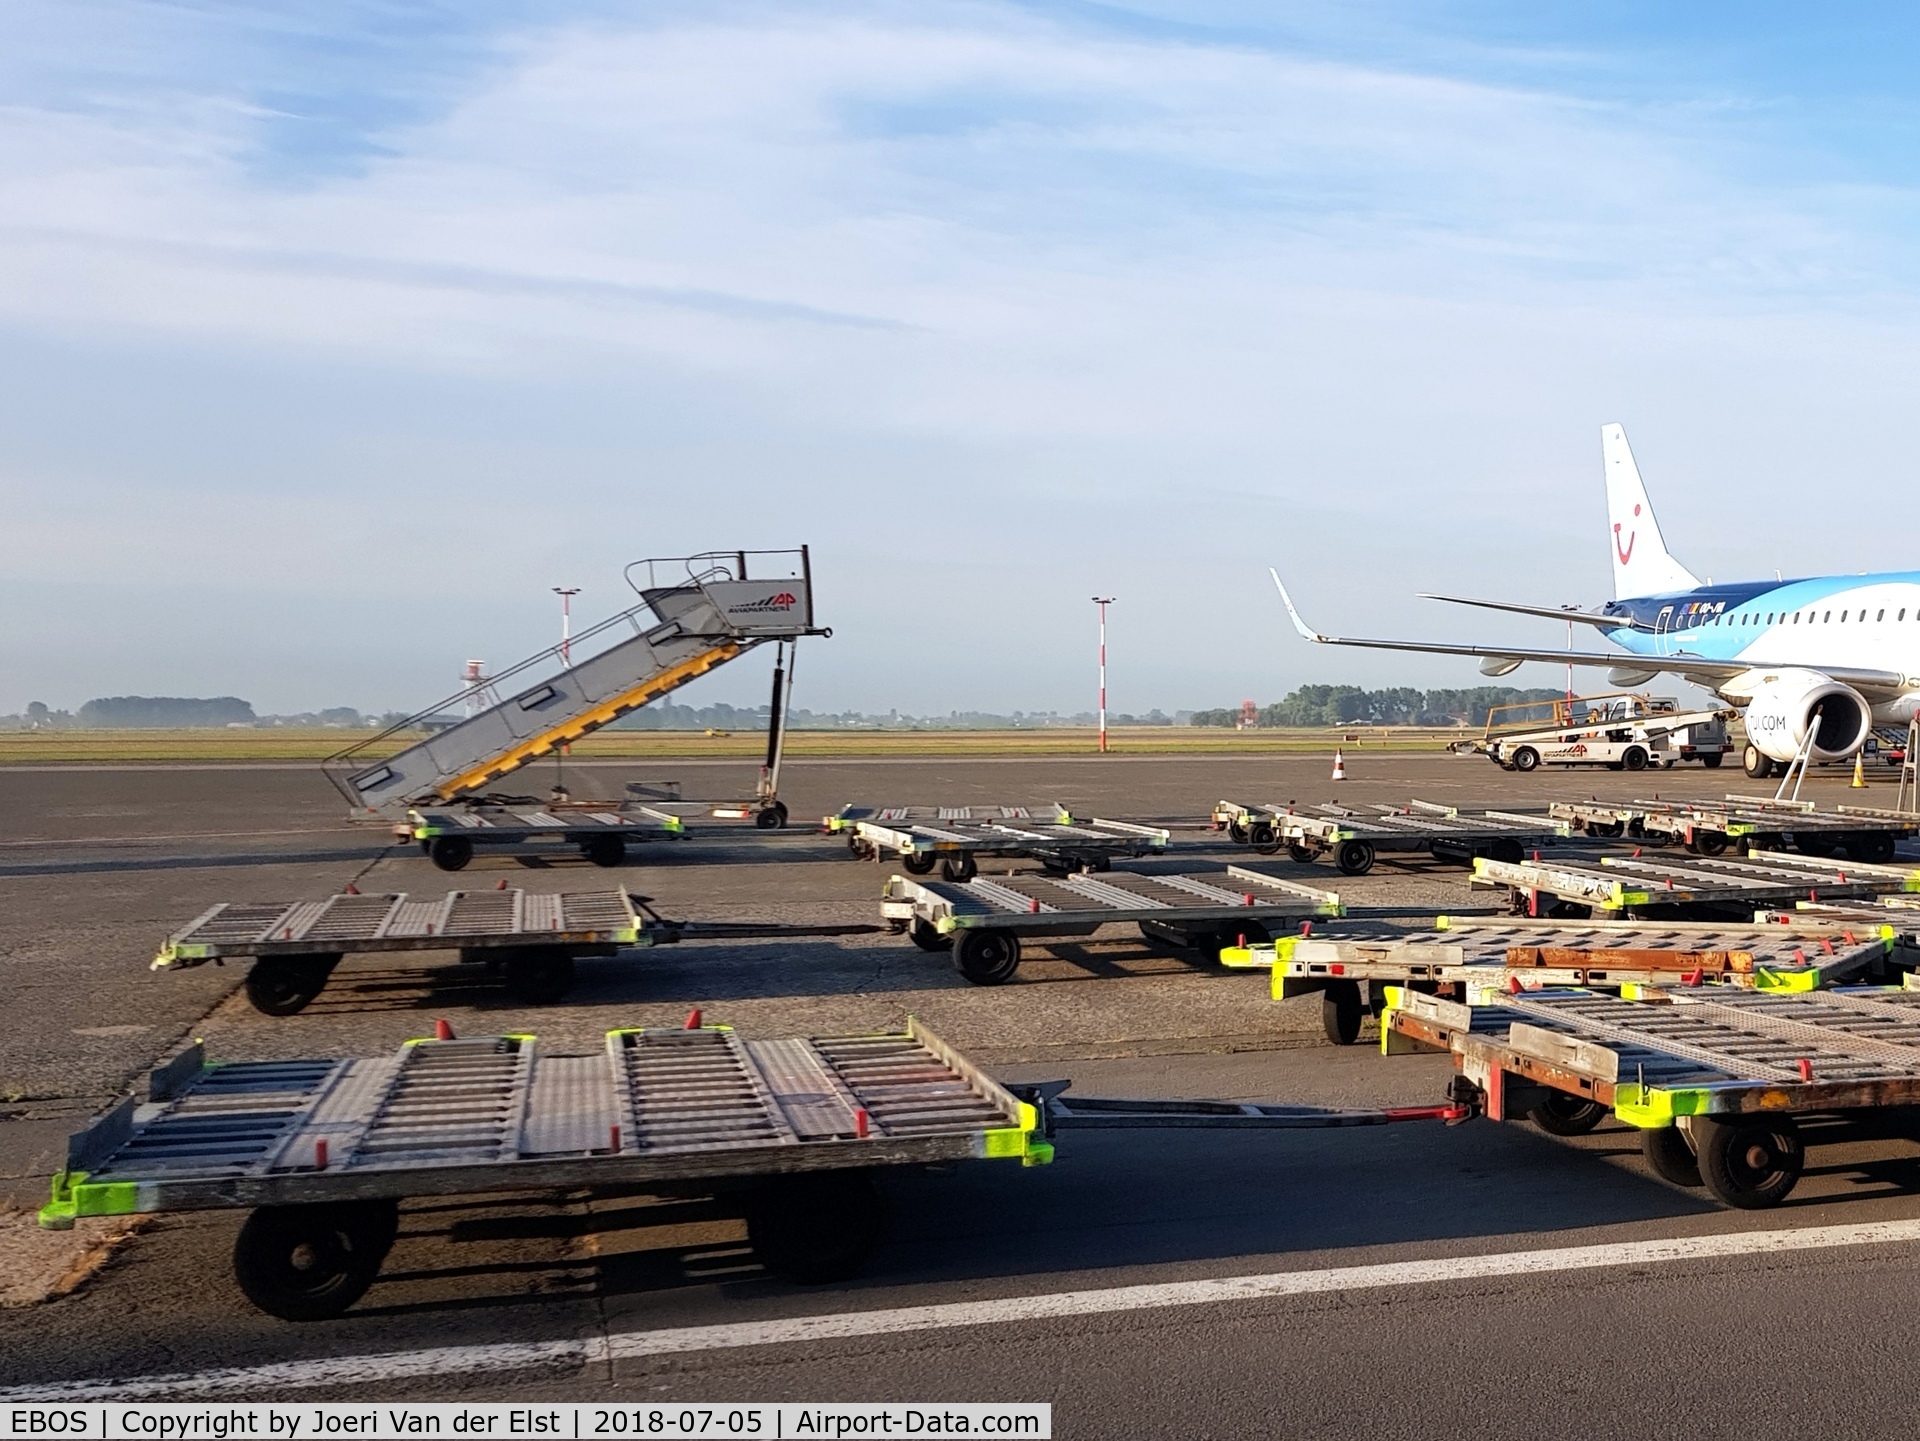 Ostend-Bruges International Airport, Ostend Belgium (EBOS) - Stairway to Heaven,loading equipment, OO-JVA, picture taken by An Van der Elst with permission